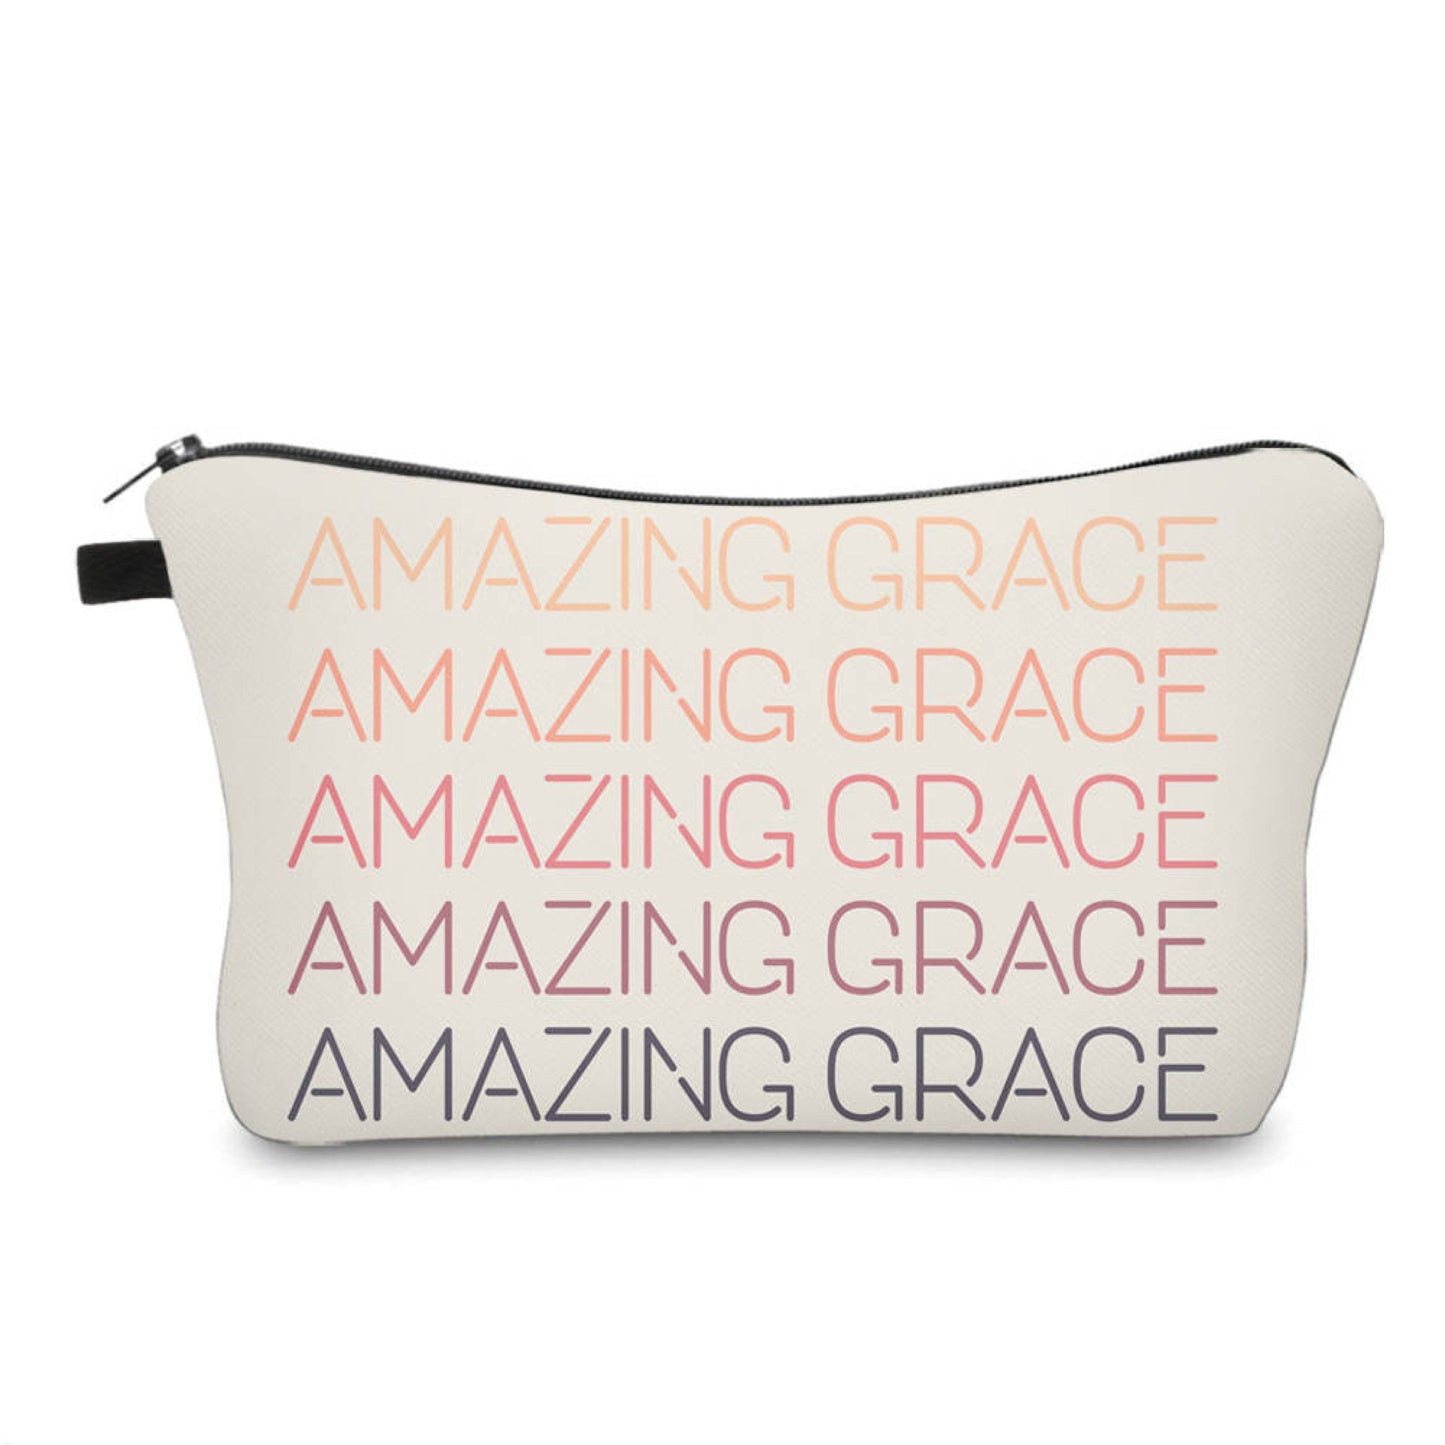 Amazing Grace - Water-Resistant Multi-Use Pouch